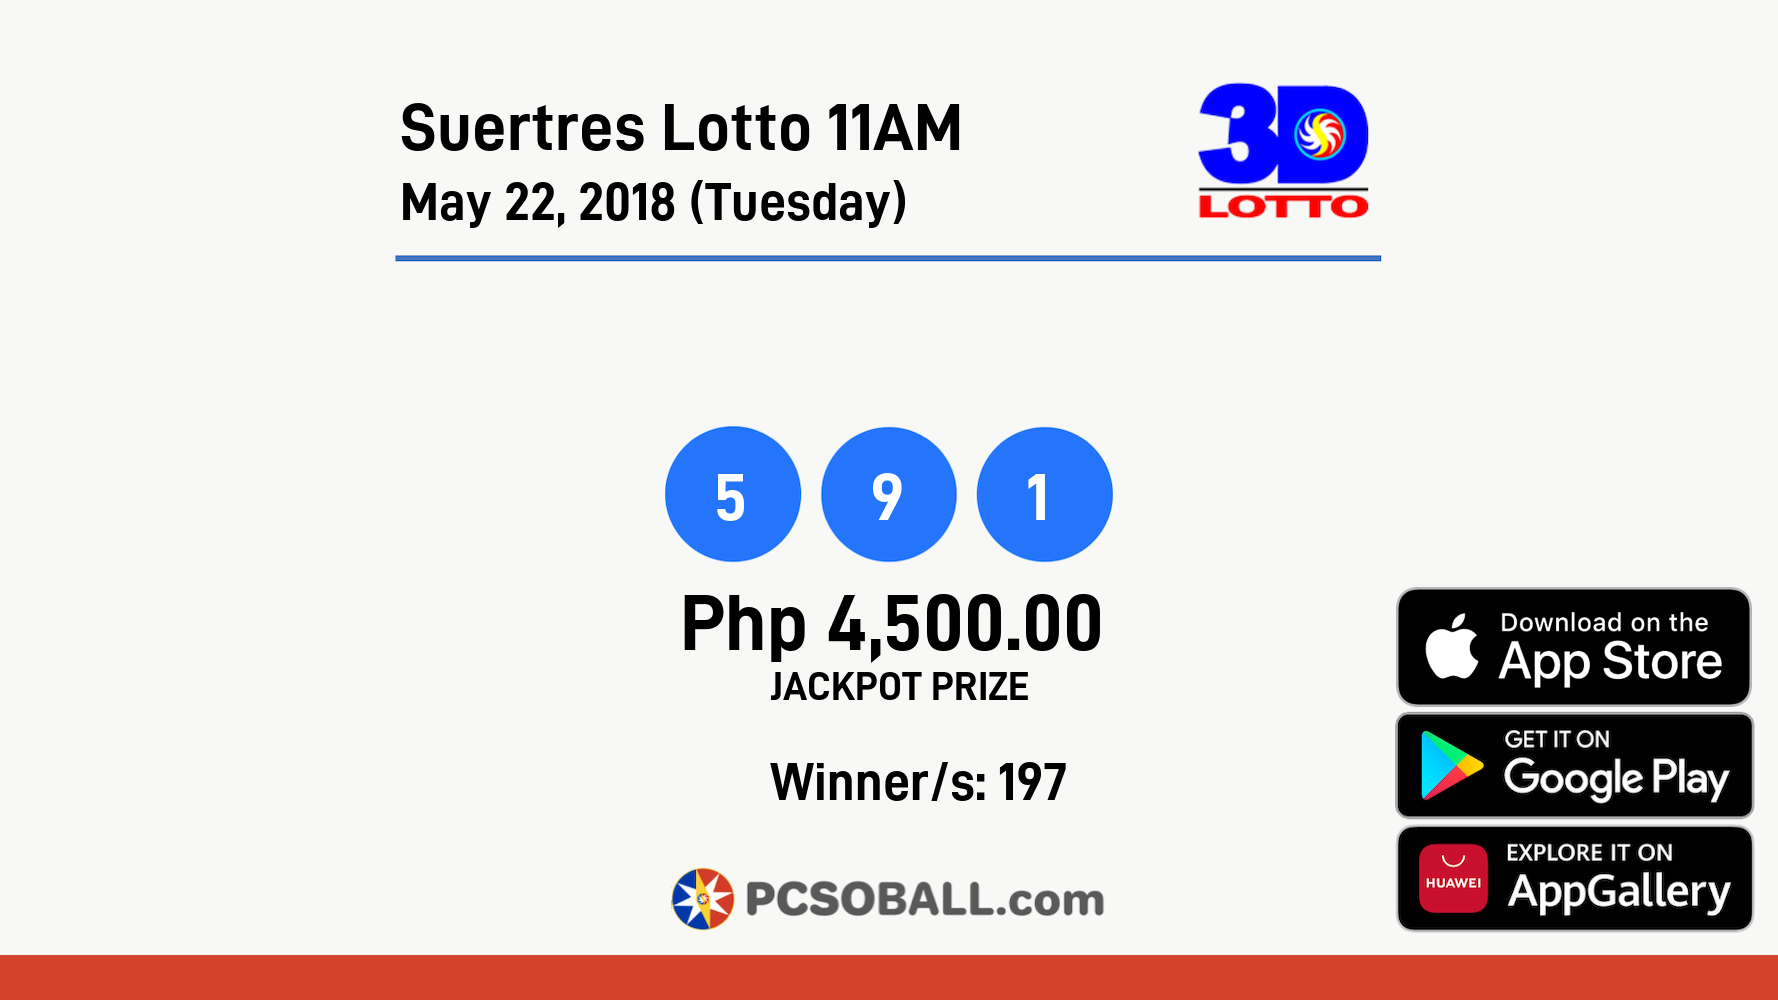 Suertres Lotto 11AM May 22, 2018 (Tuesday) Result